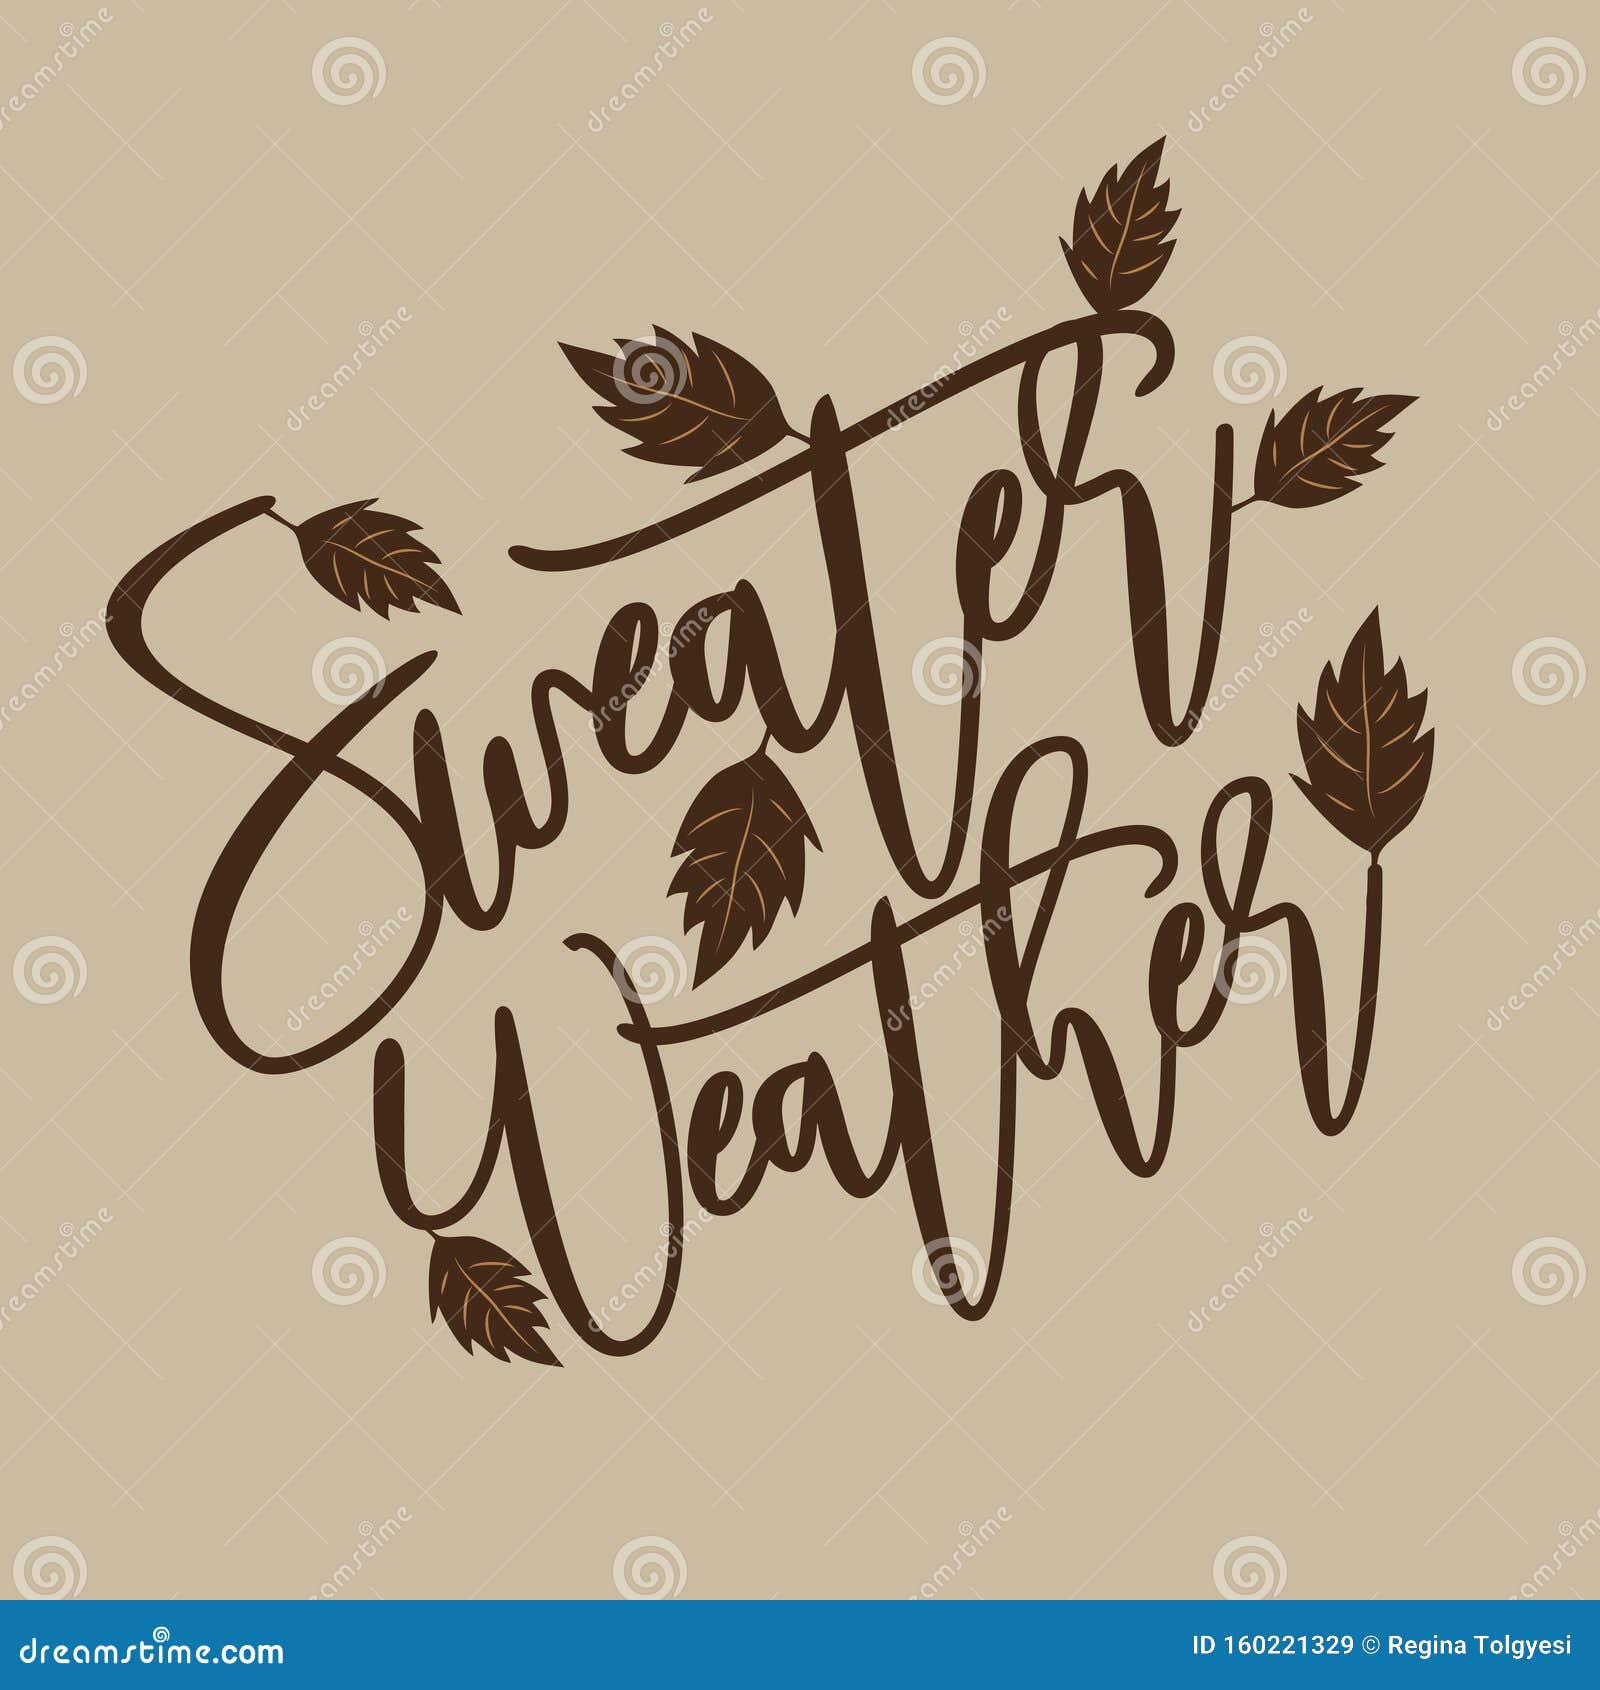 sweater weather - autumnal thanksgiving handwritting text, with leaves.